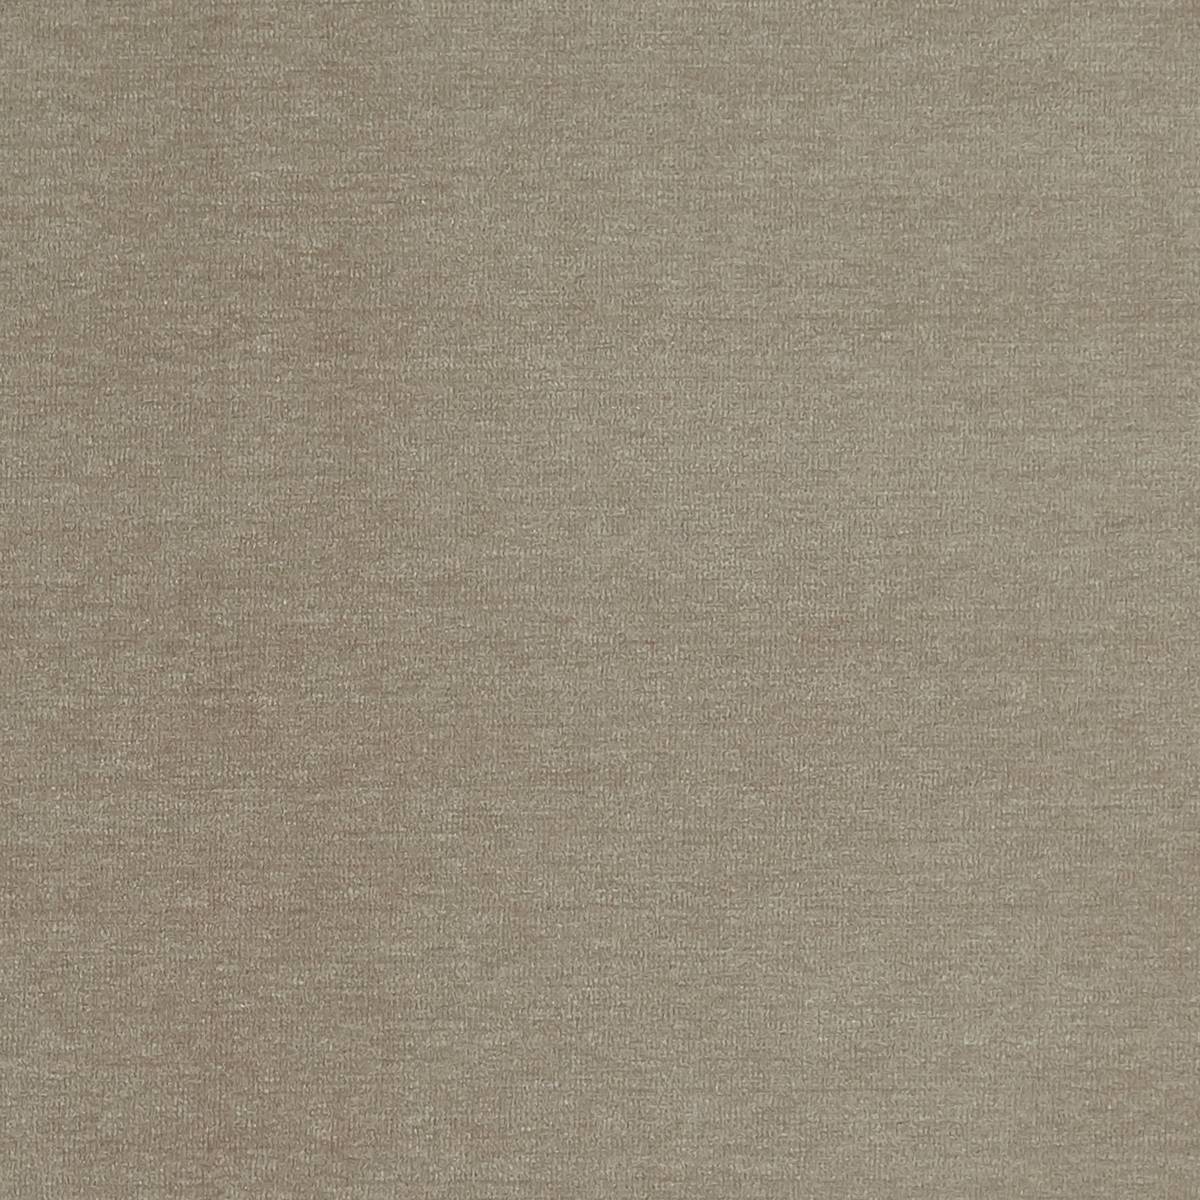 Maculo Taupe Fabric by Clarke & Clarke